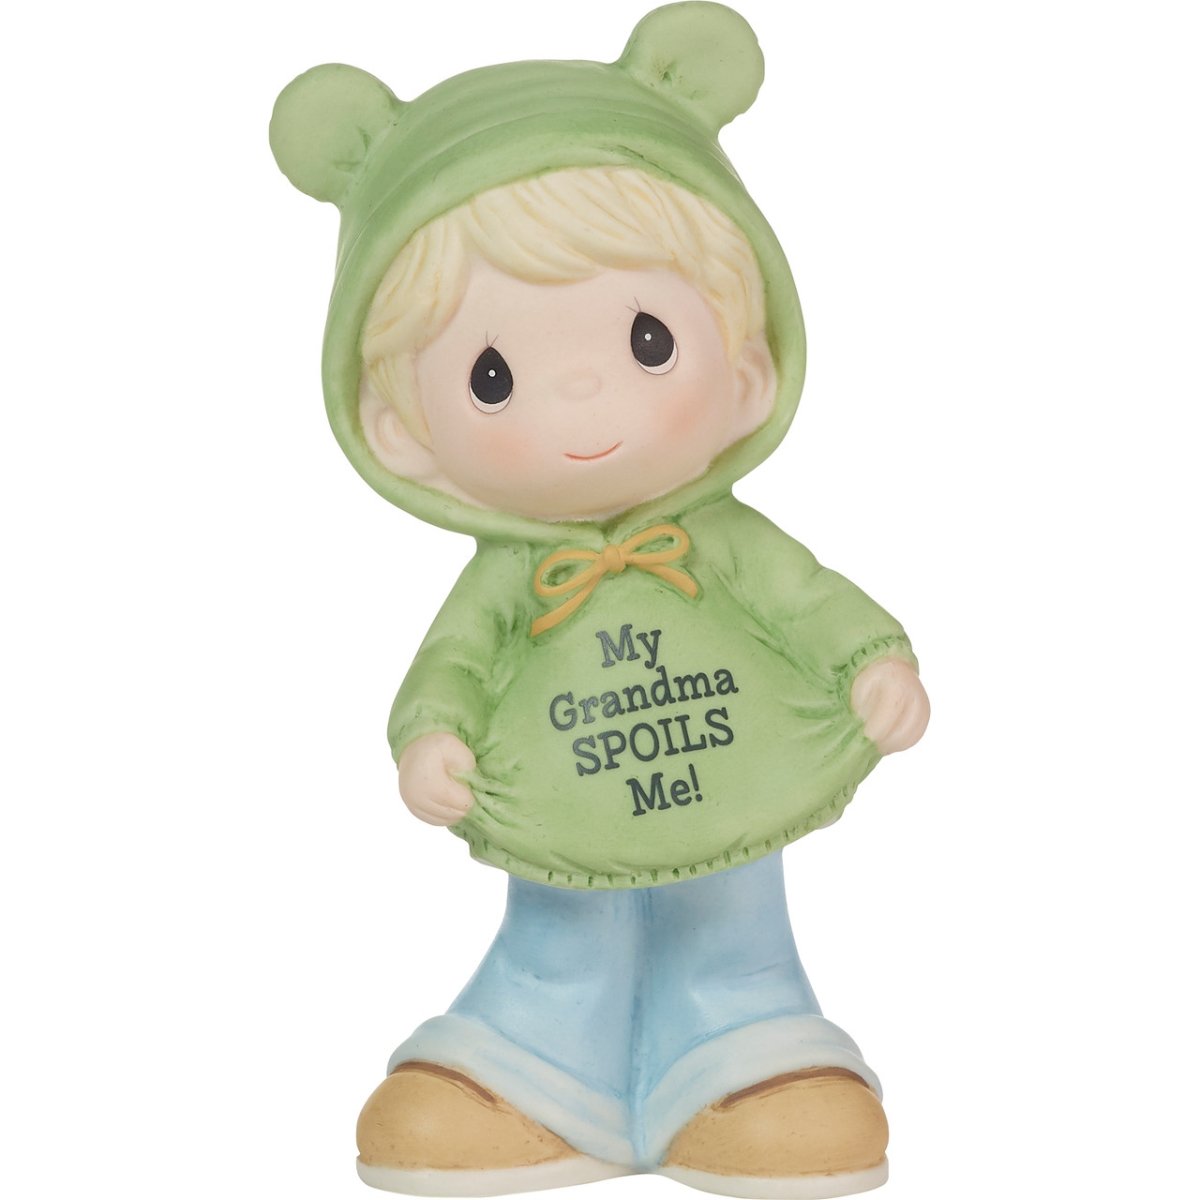 Picture of Be the Light Christian Bookstore 223013 5 in. Porcelain Boy Wearing Grandma T-shirt Light Skin Blonde Hair Figurine, Multi Color